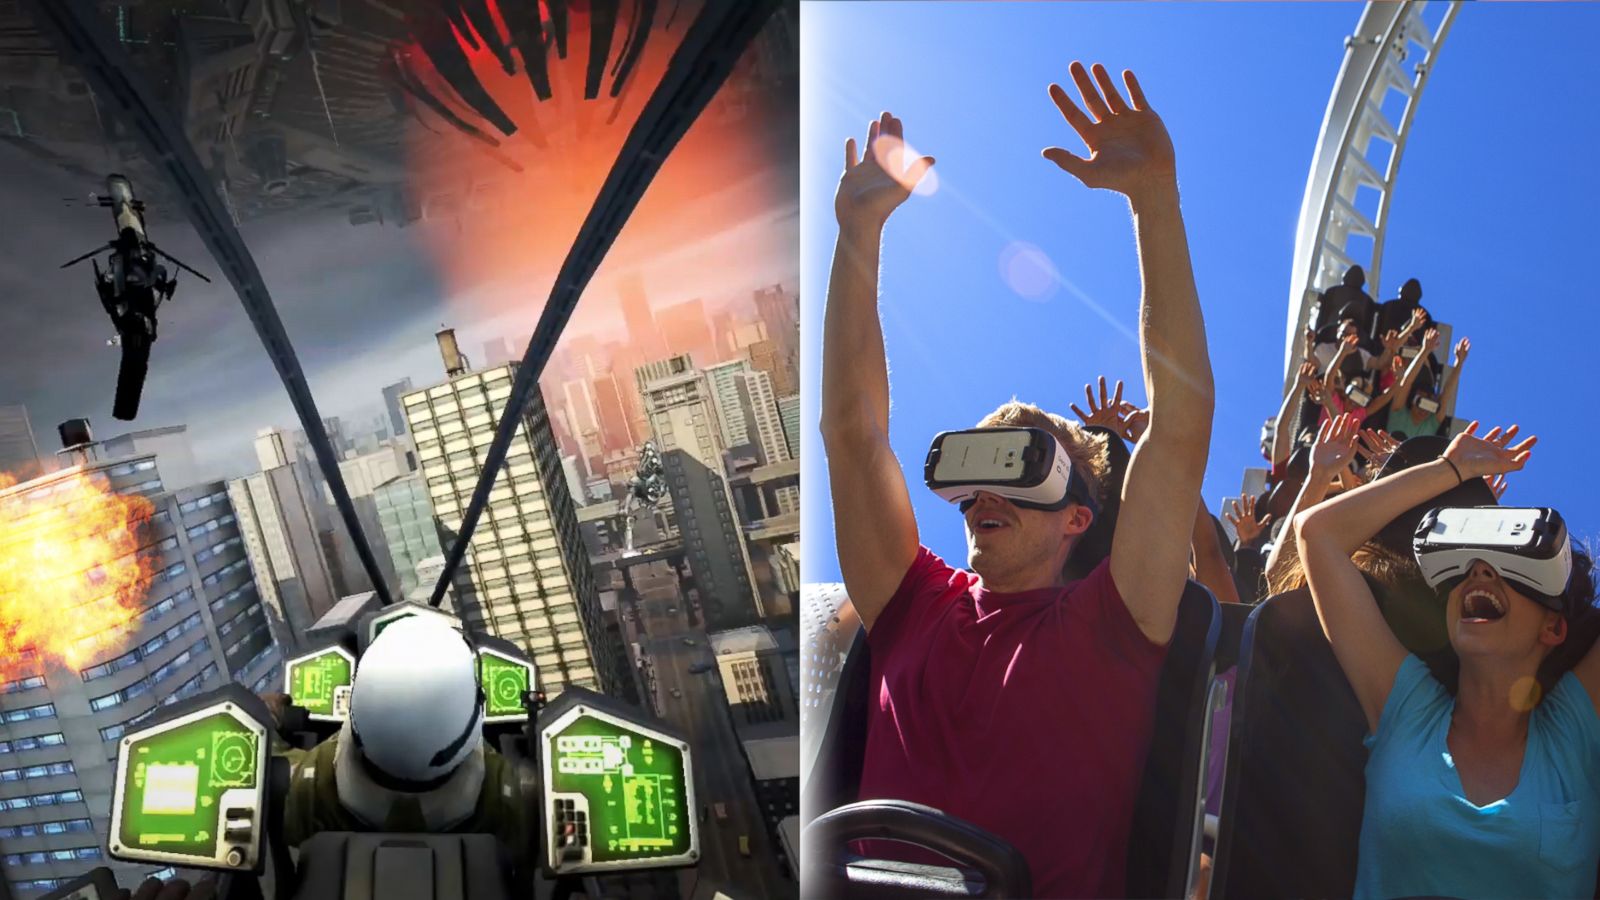 Virtual Goggles Used to Intensify Coaster Experiences ABC News